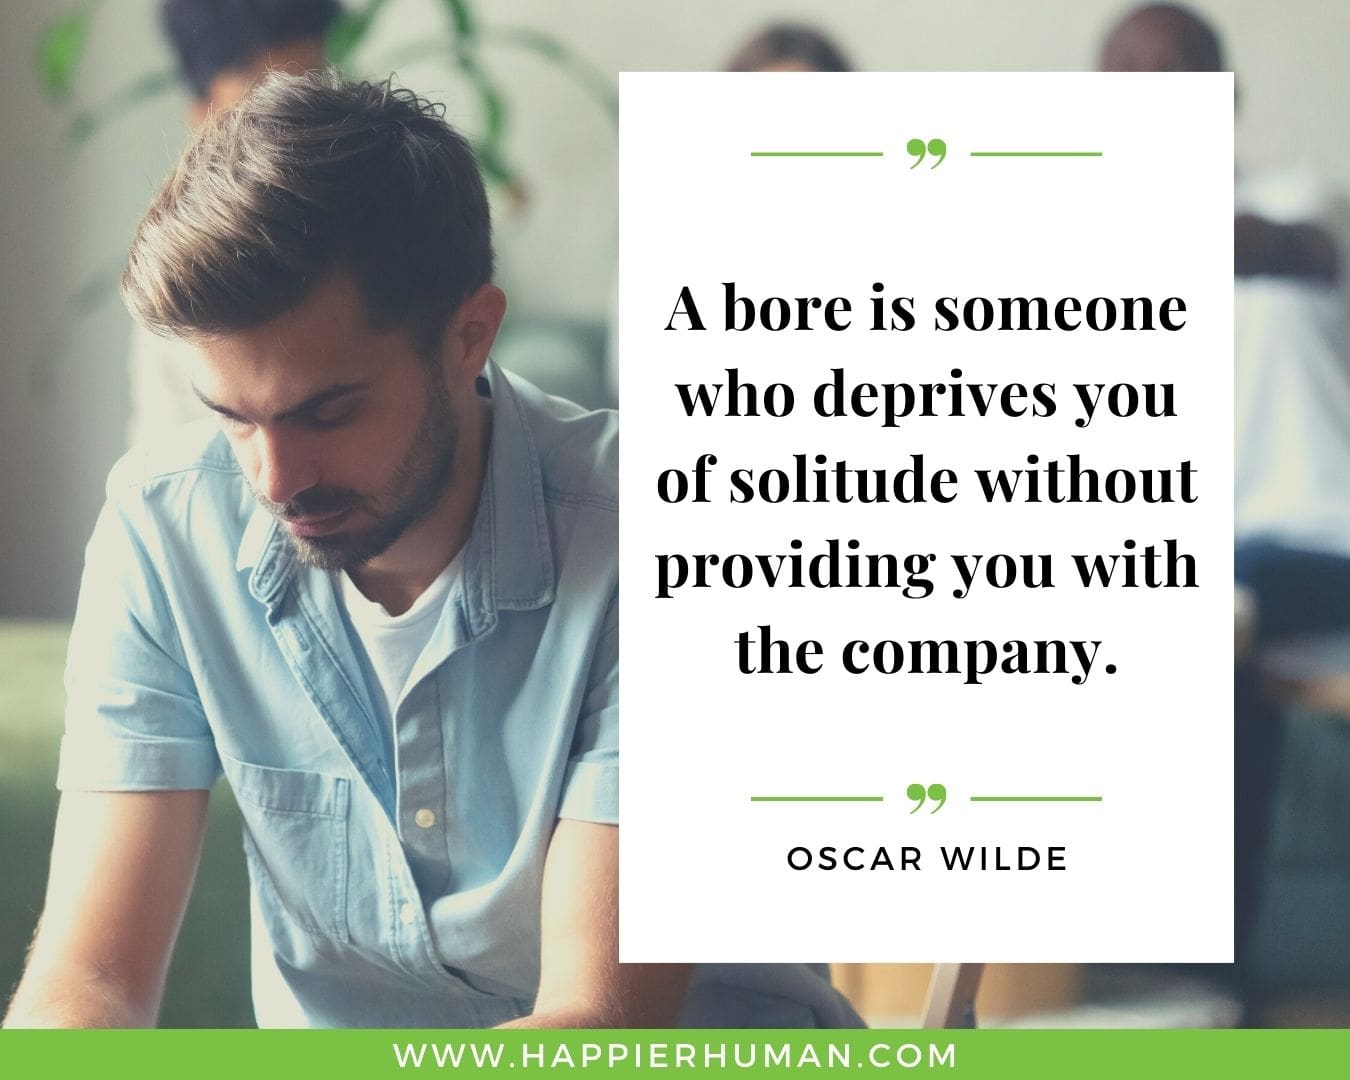 Introvert Quotes - “A bore is someone who deprives you of solitude without providing you with the company.” – Oscar Wilde